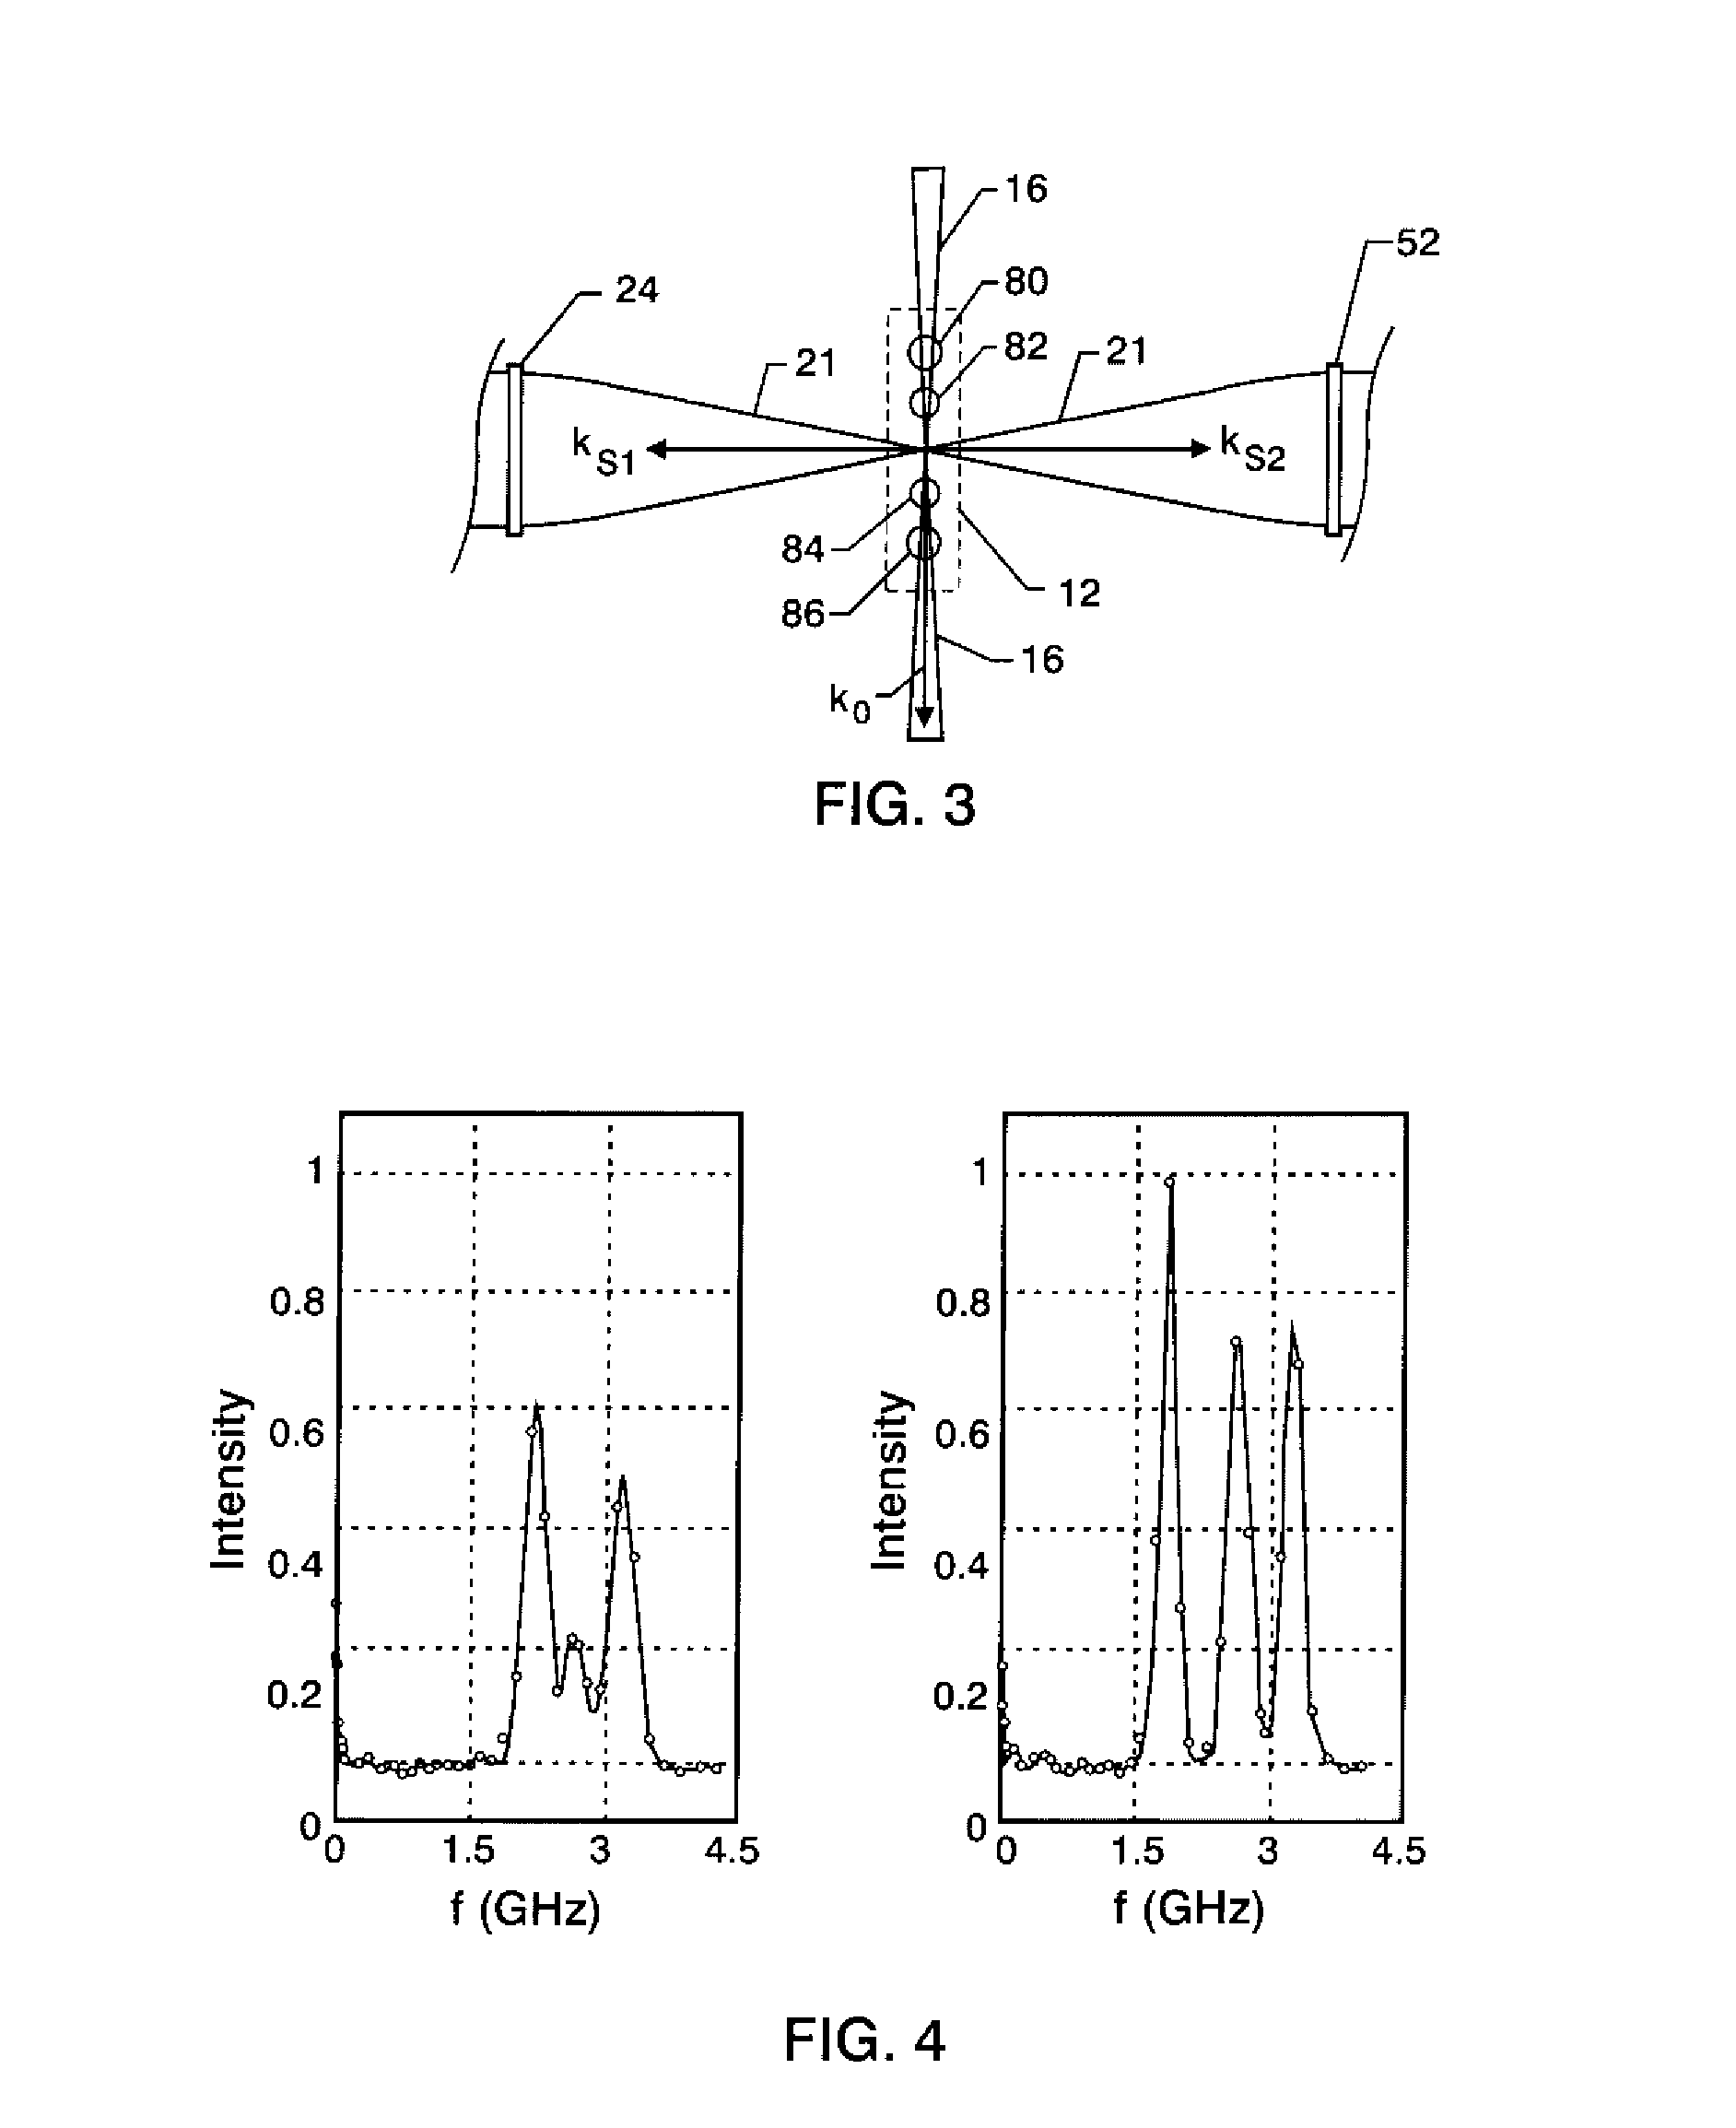 Interferometric Rayleigh Scattering Measurement System